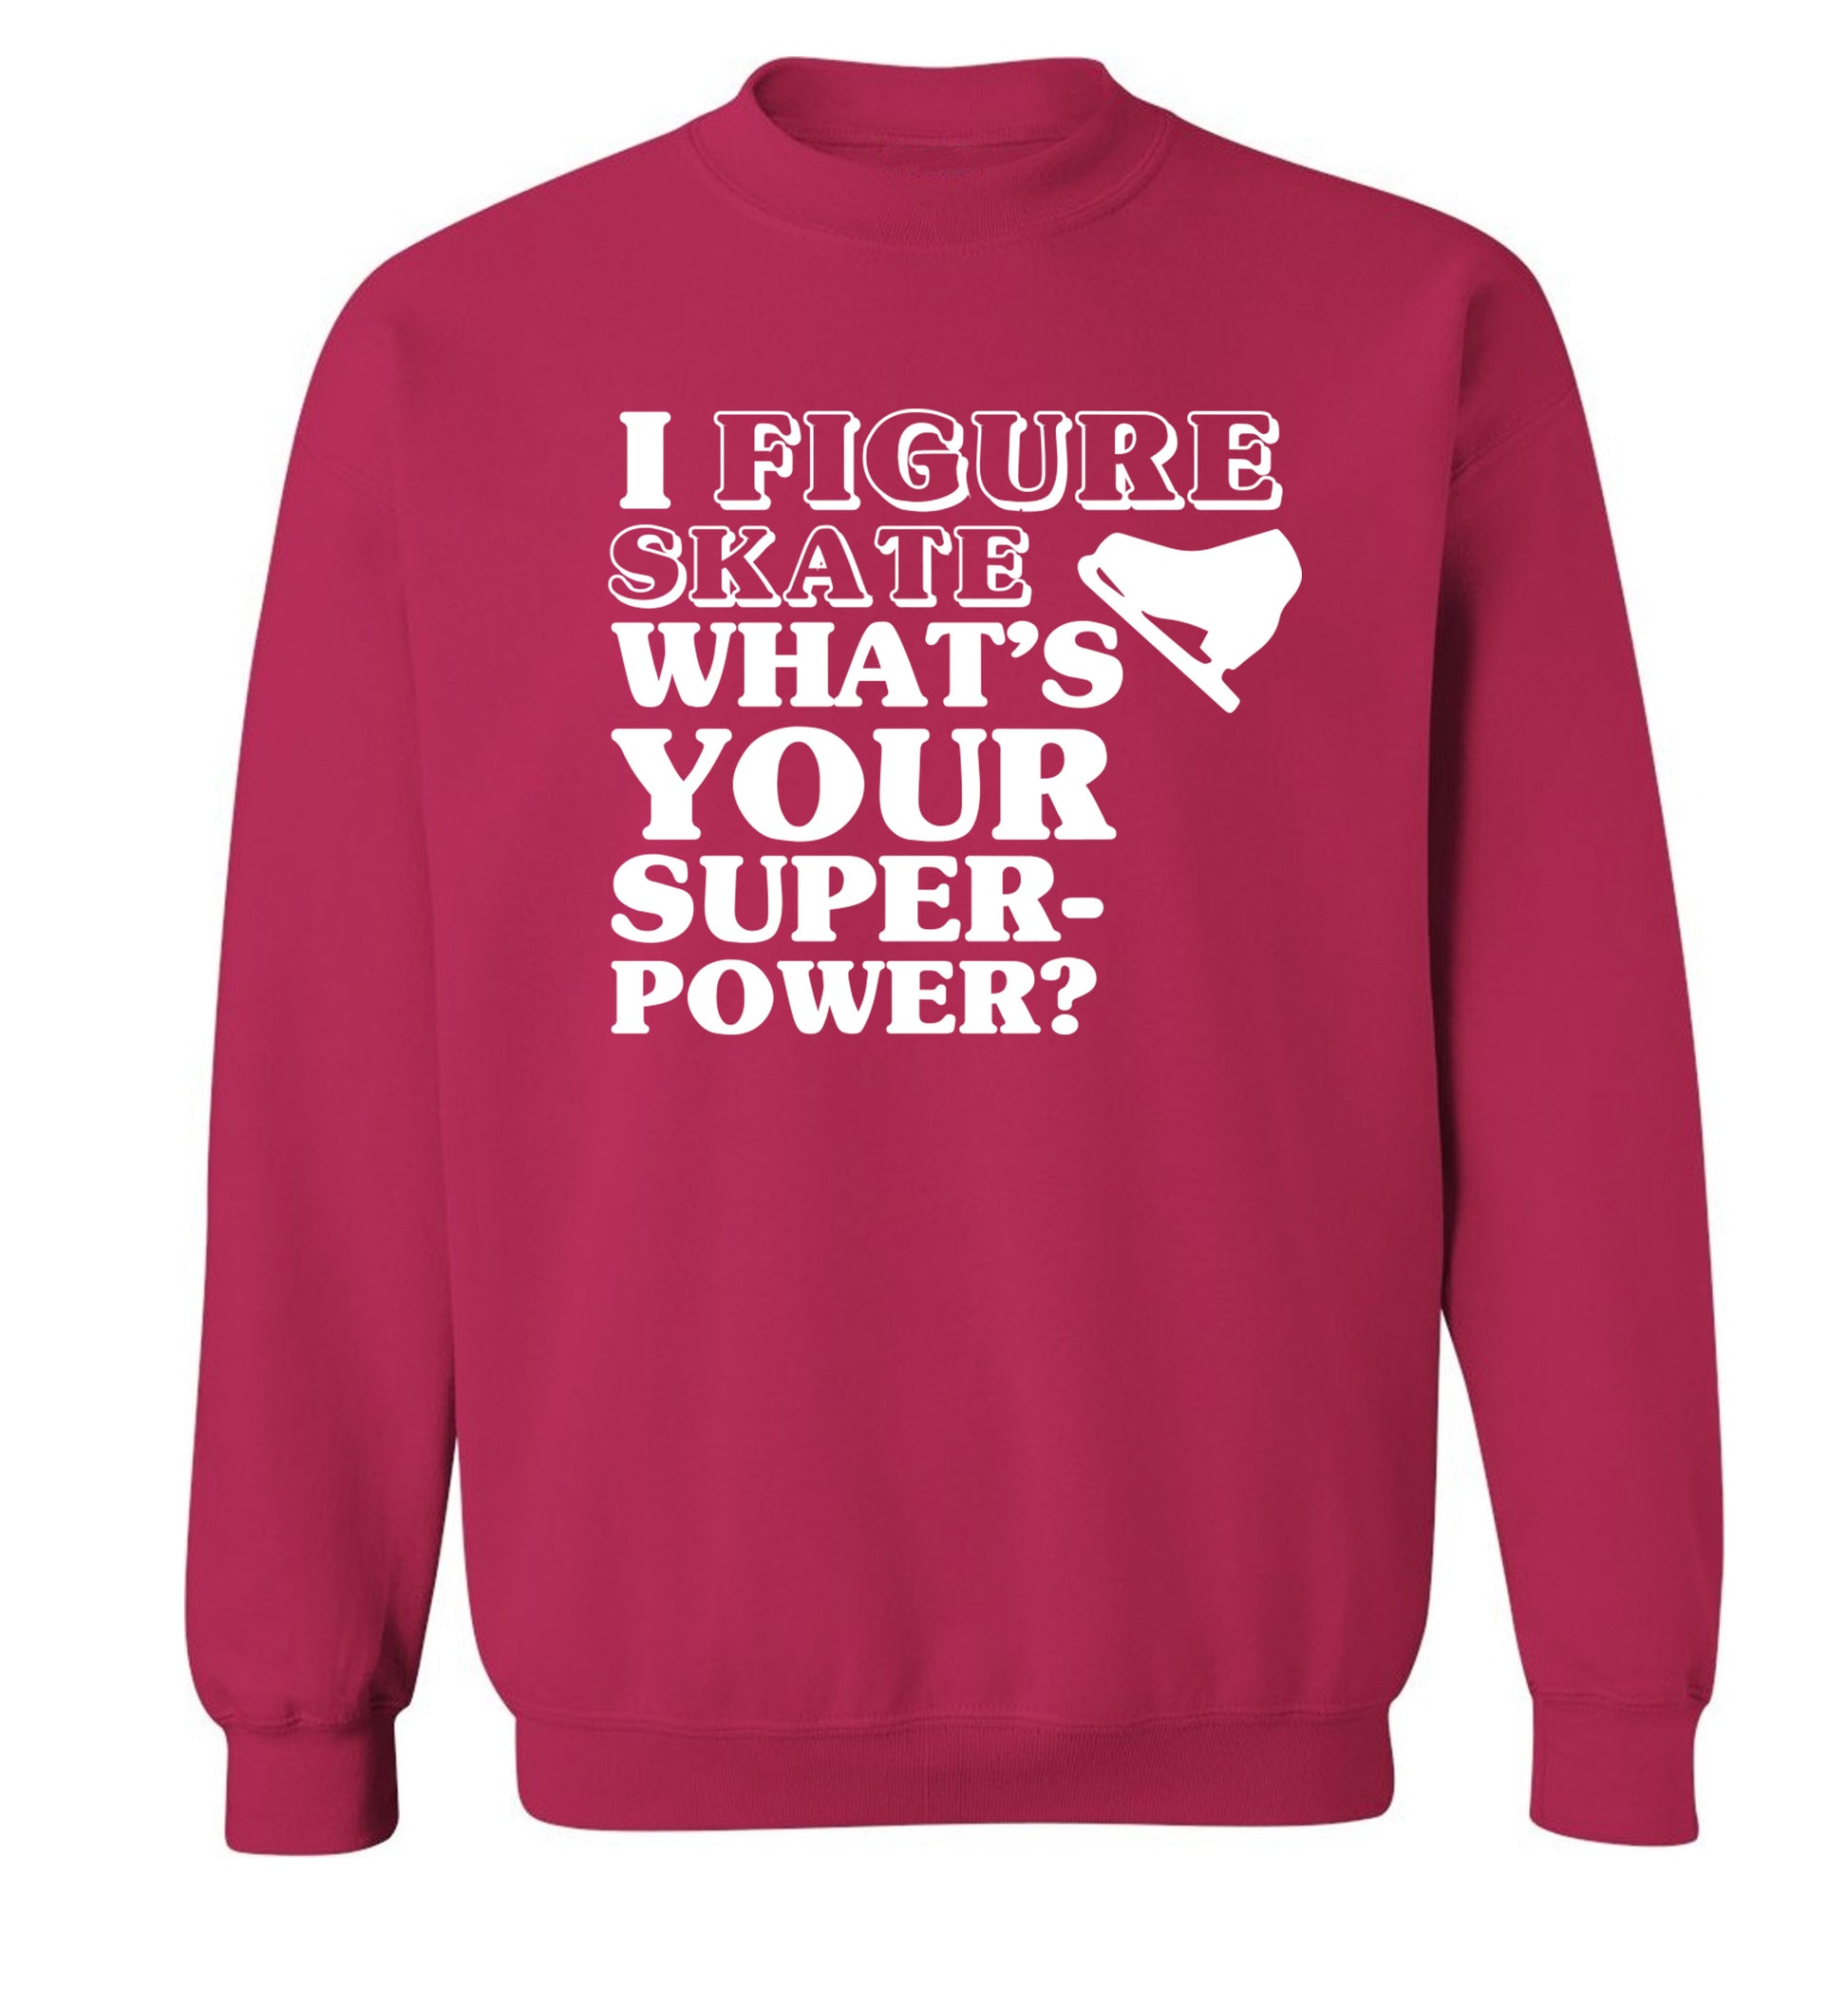 I figure skate what's your superpower? Adult's unisexpink Sweater 2XL